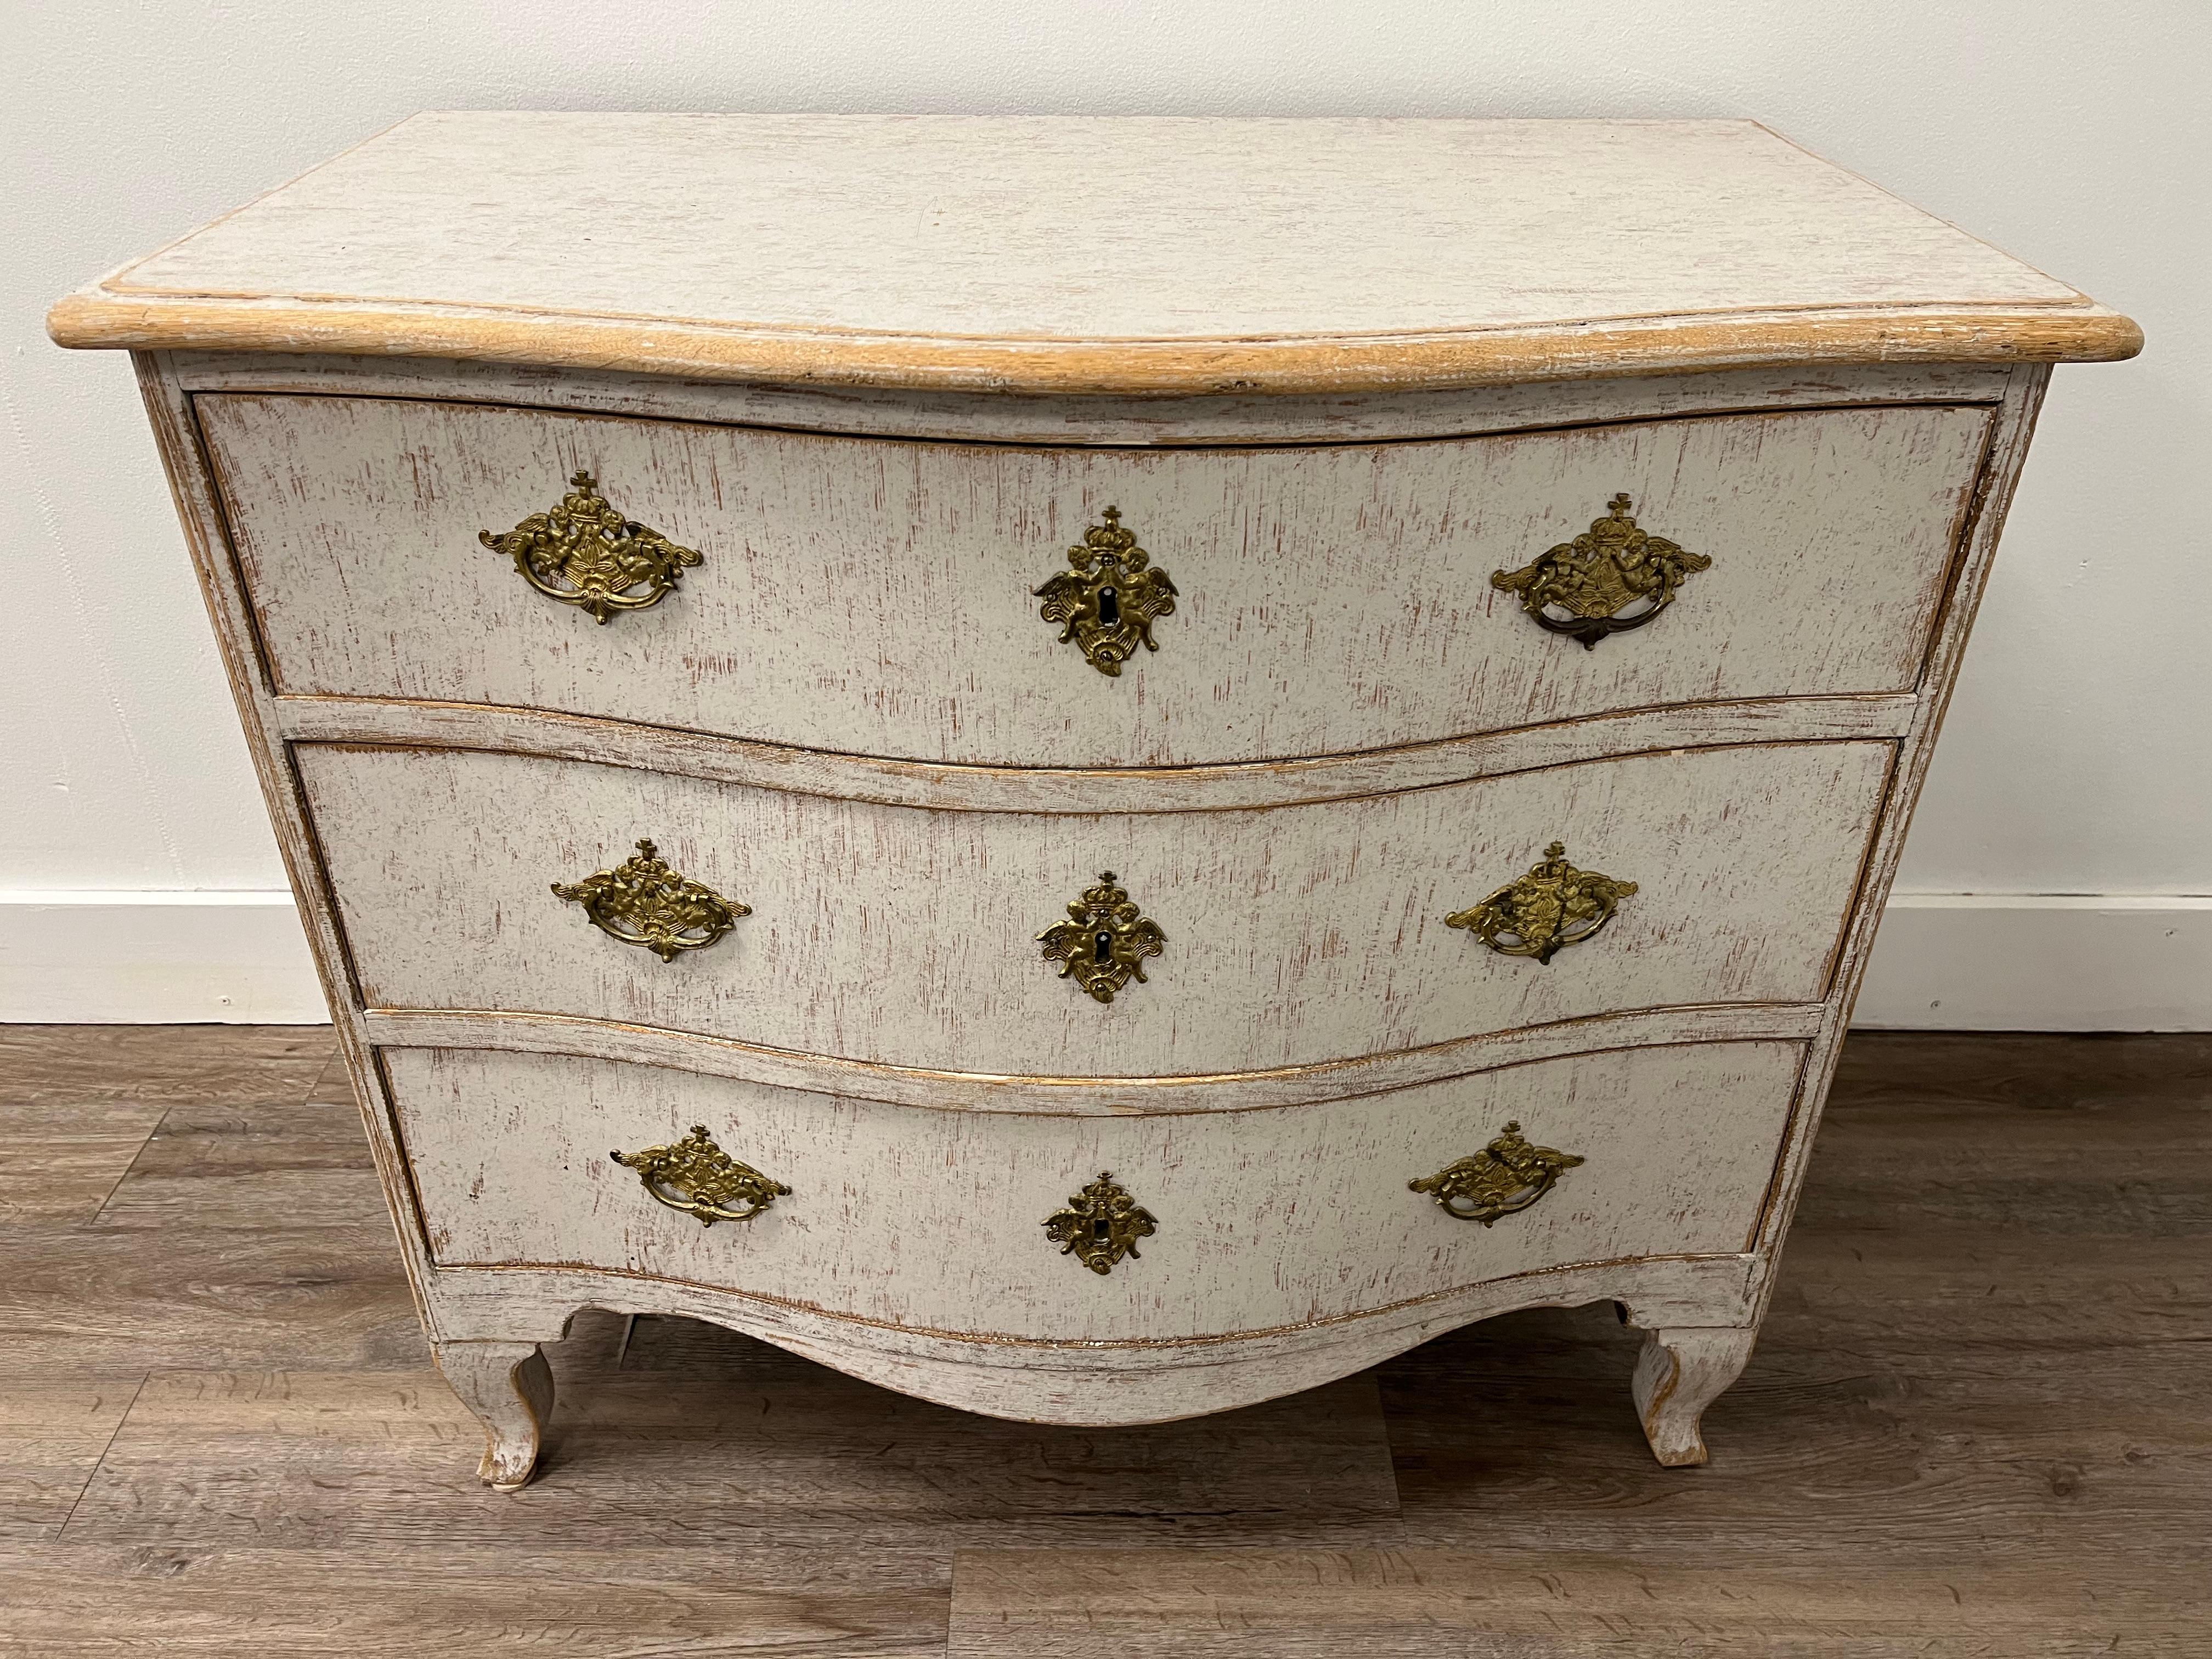 A three drawer Rococo commode with original cherub adorned brass hardware and iron locks. Featuring a bow front and cabriolet legs. Tastefully repainted in soft white-grey. 